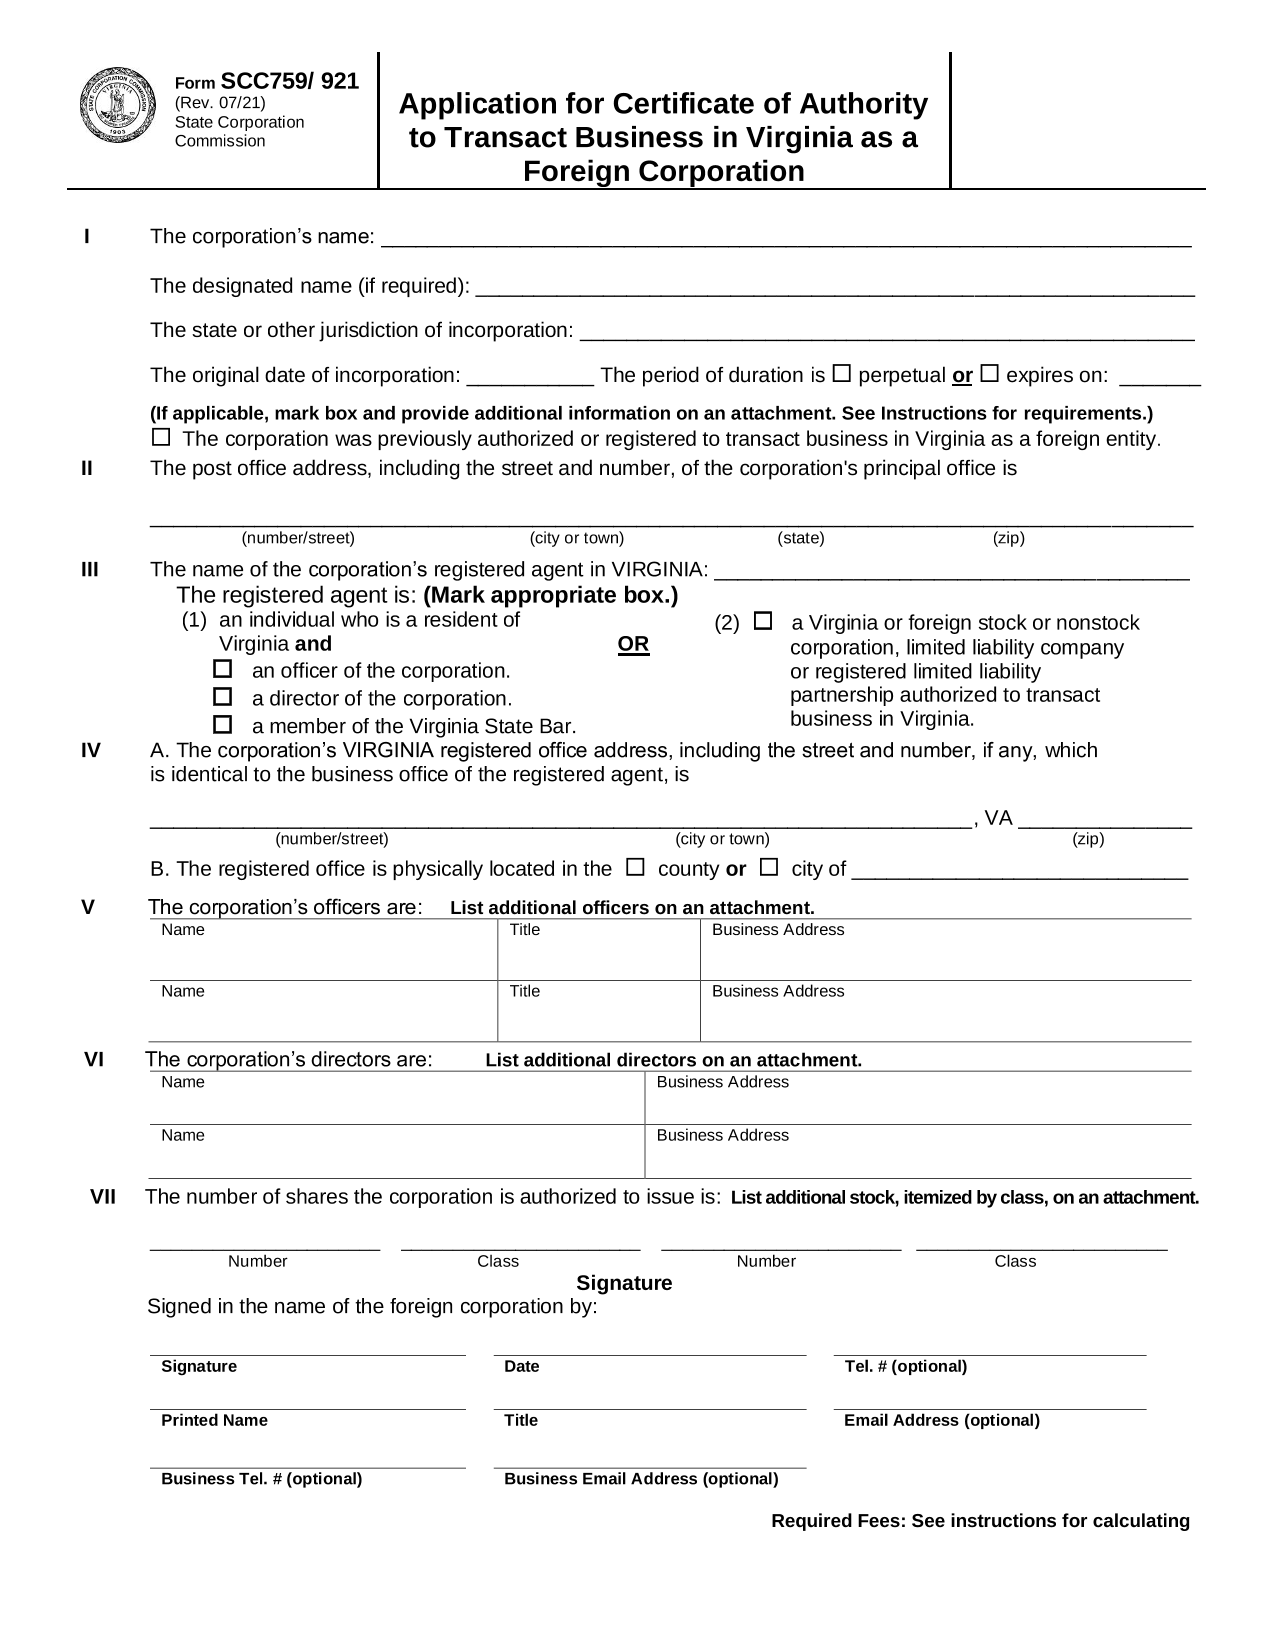 virginia-foreign-nonprofit-application-for-a-certificate-of-authority-to-transact-business-in-virginia